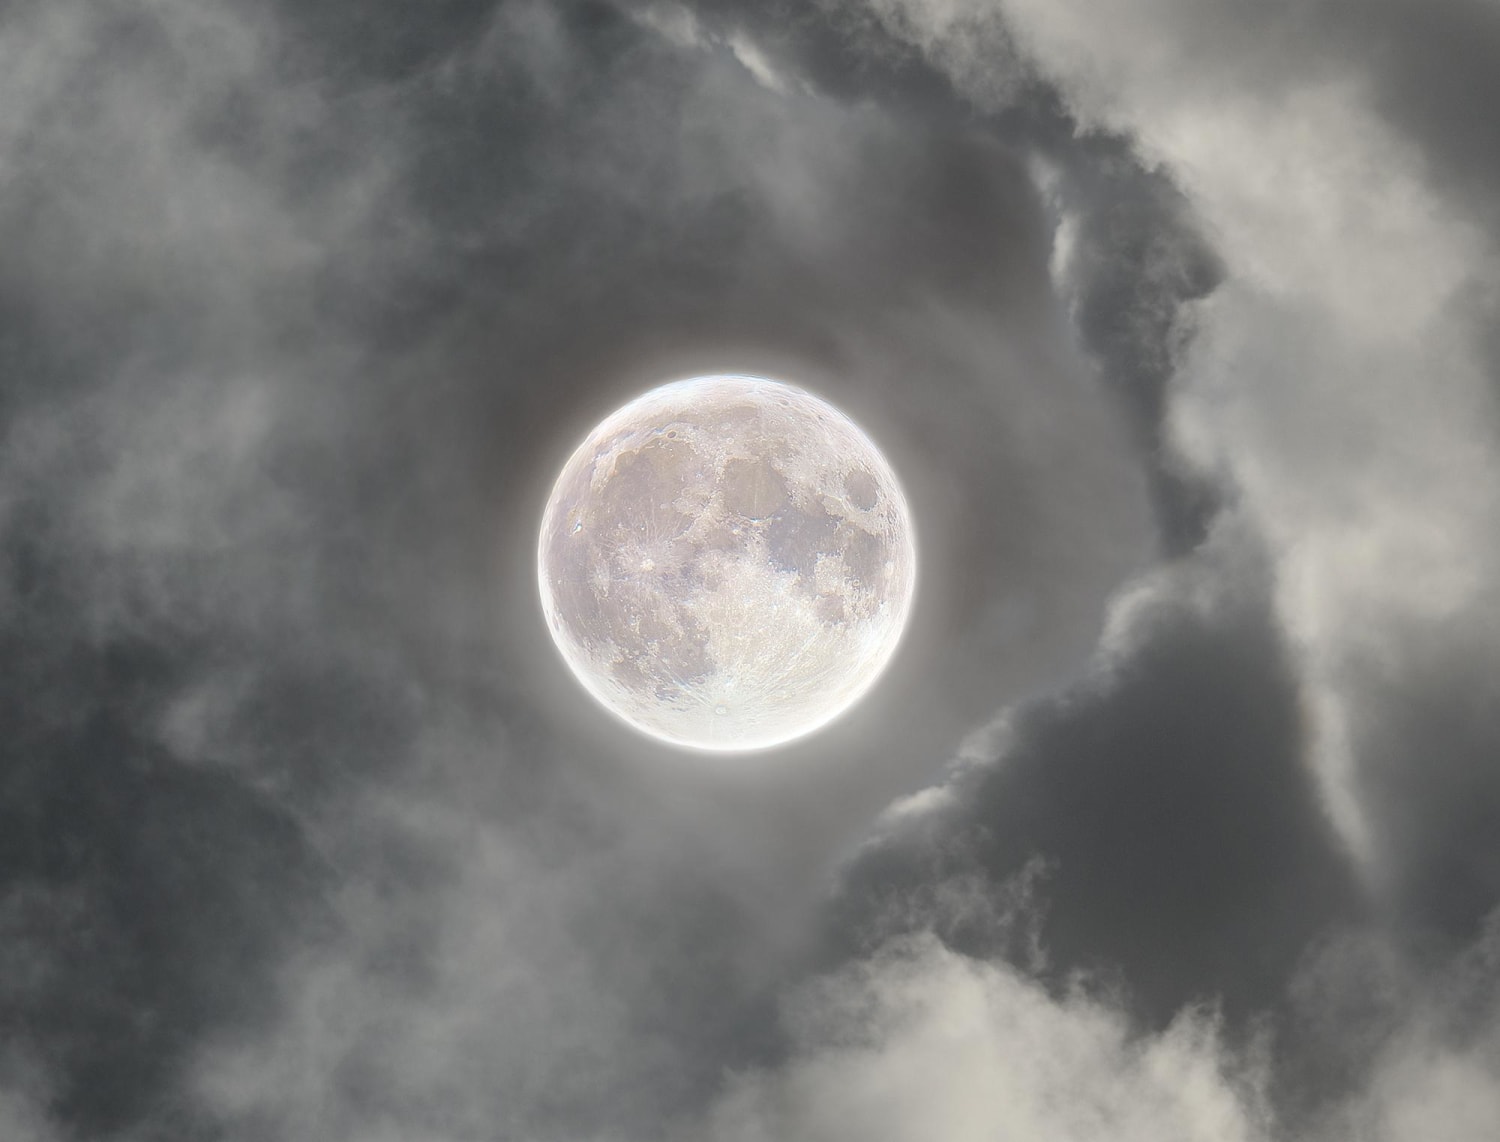 I took 500gb worth of photos of the moon through the clouds and stacked them to show detail